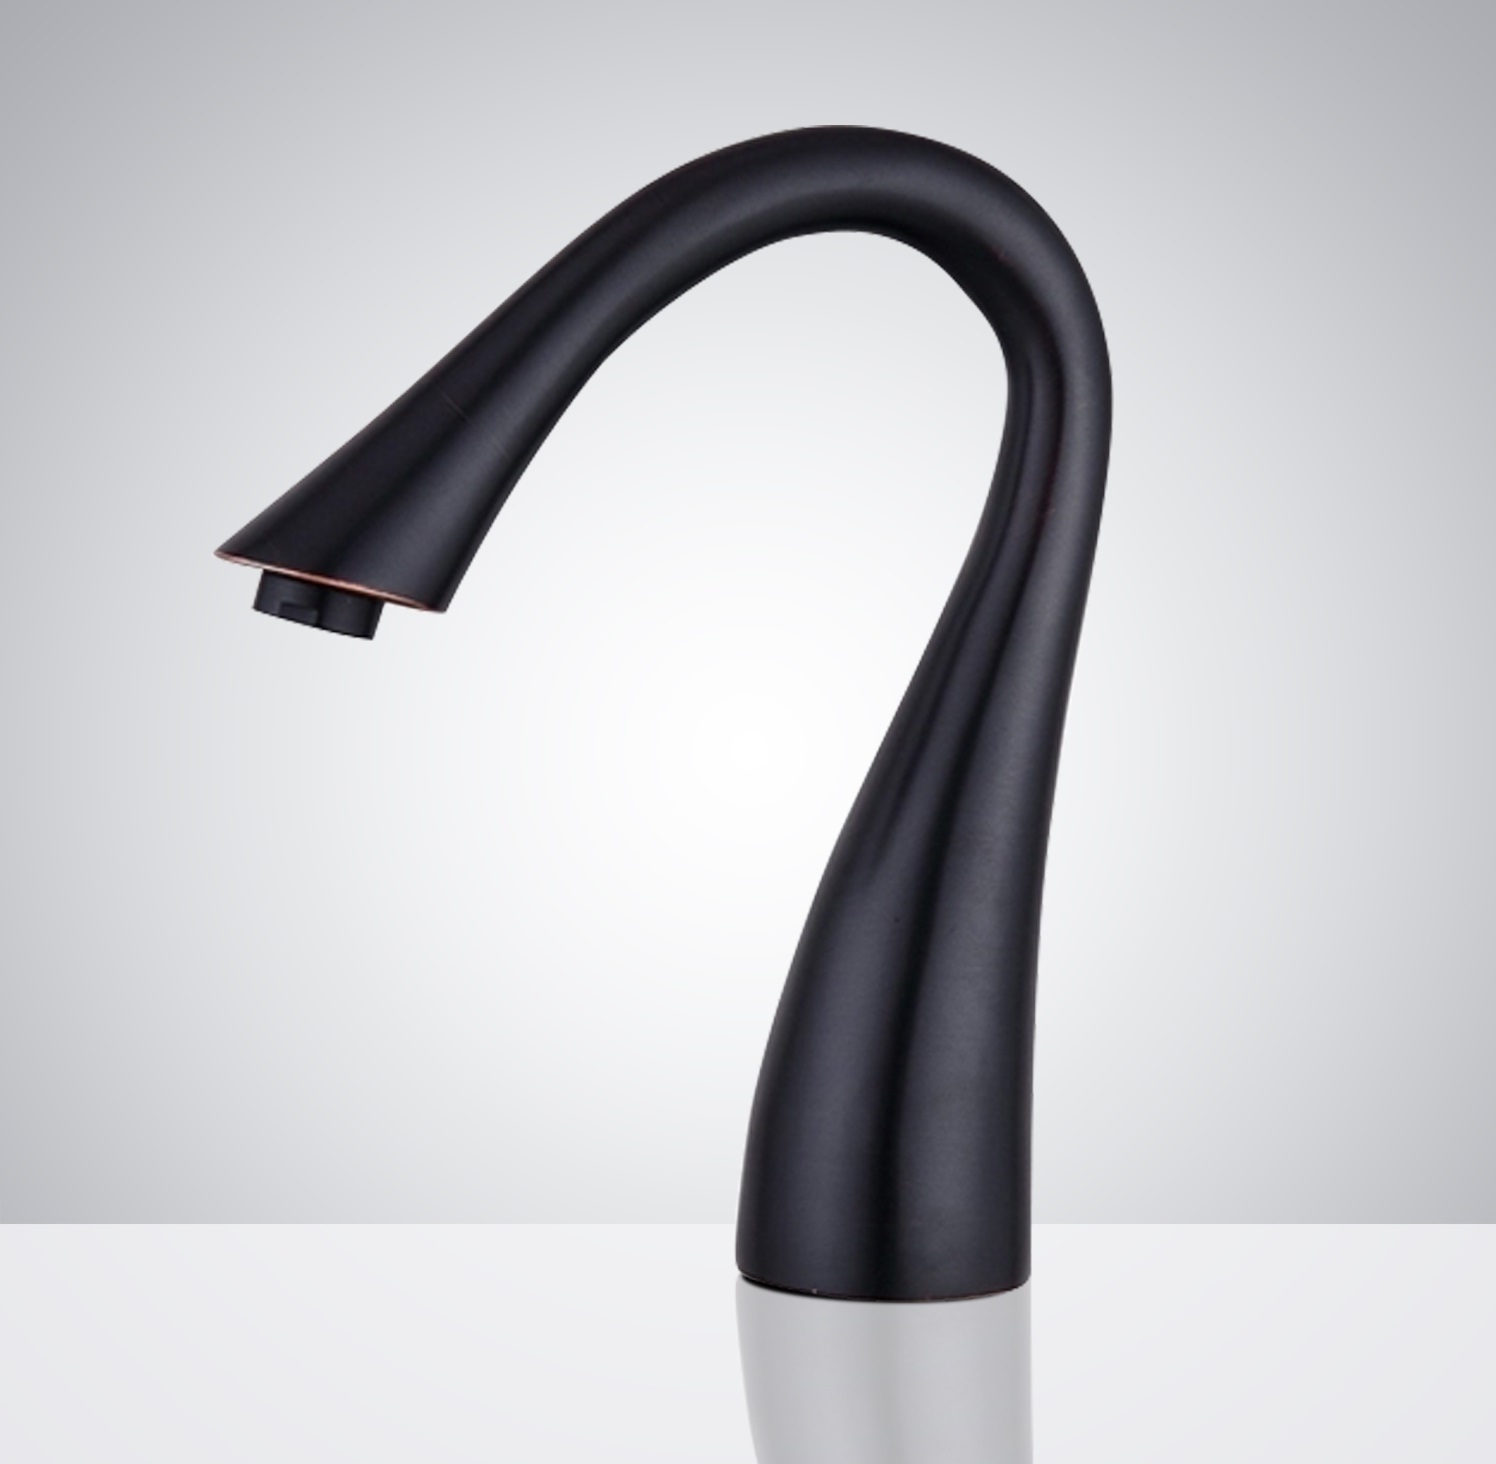 Touchless-bathroom-faucet